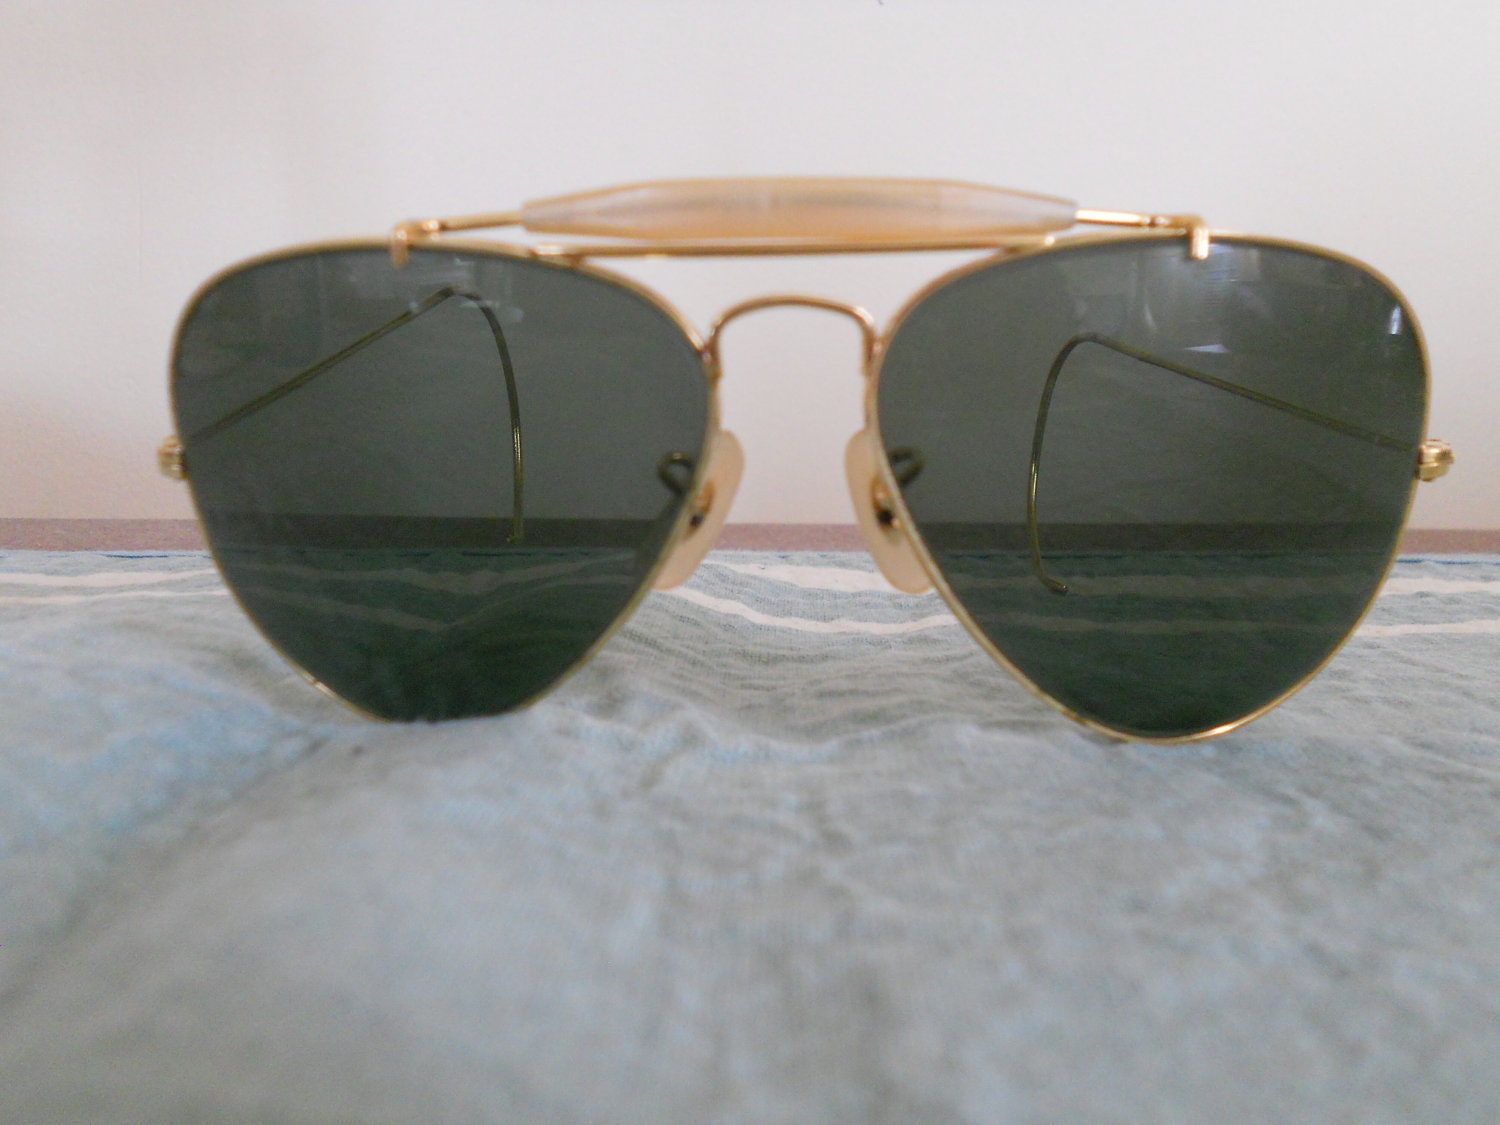 Vintage Ray Ban Aviator Sunglasses By Bausch And By Luluandgandore